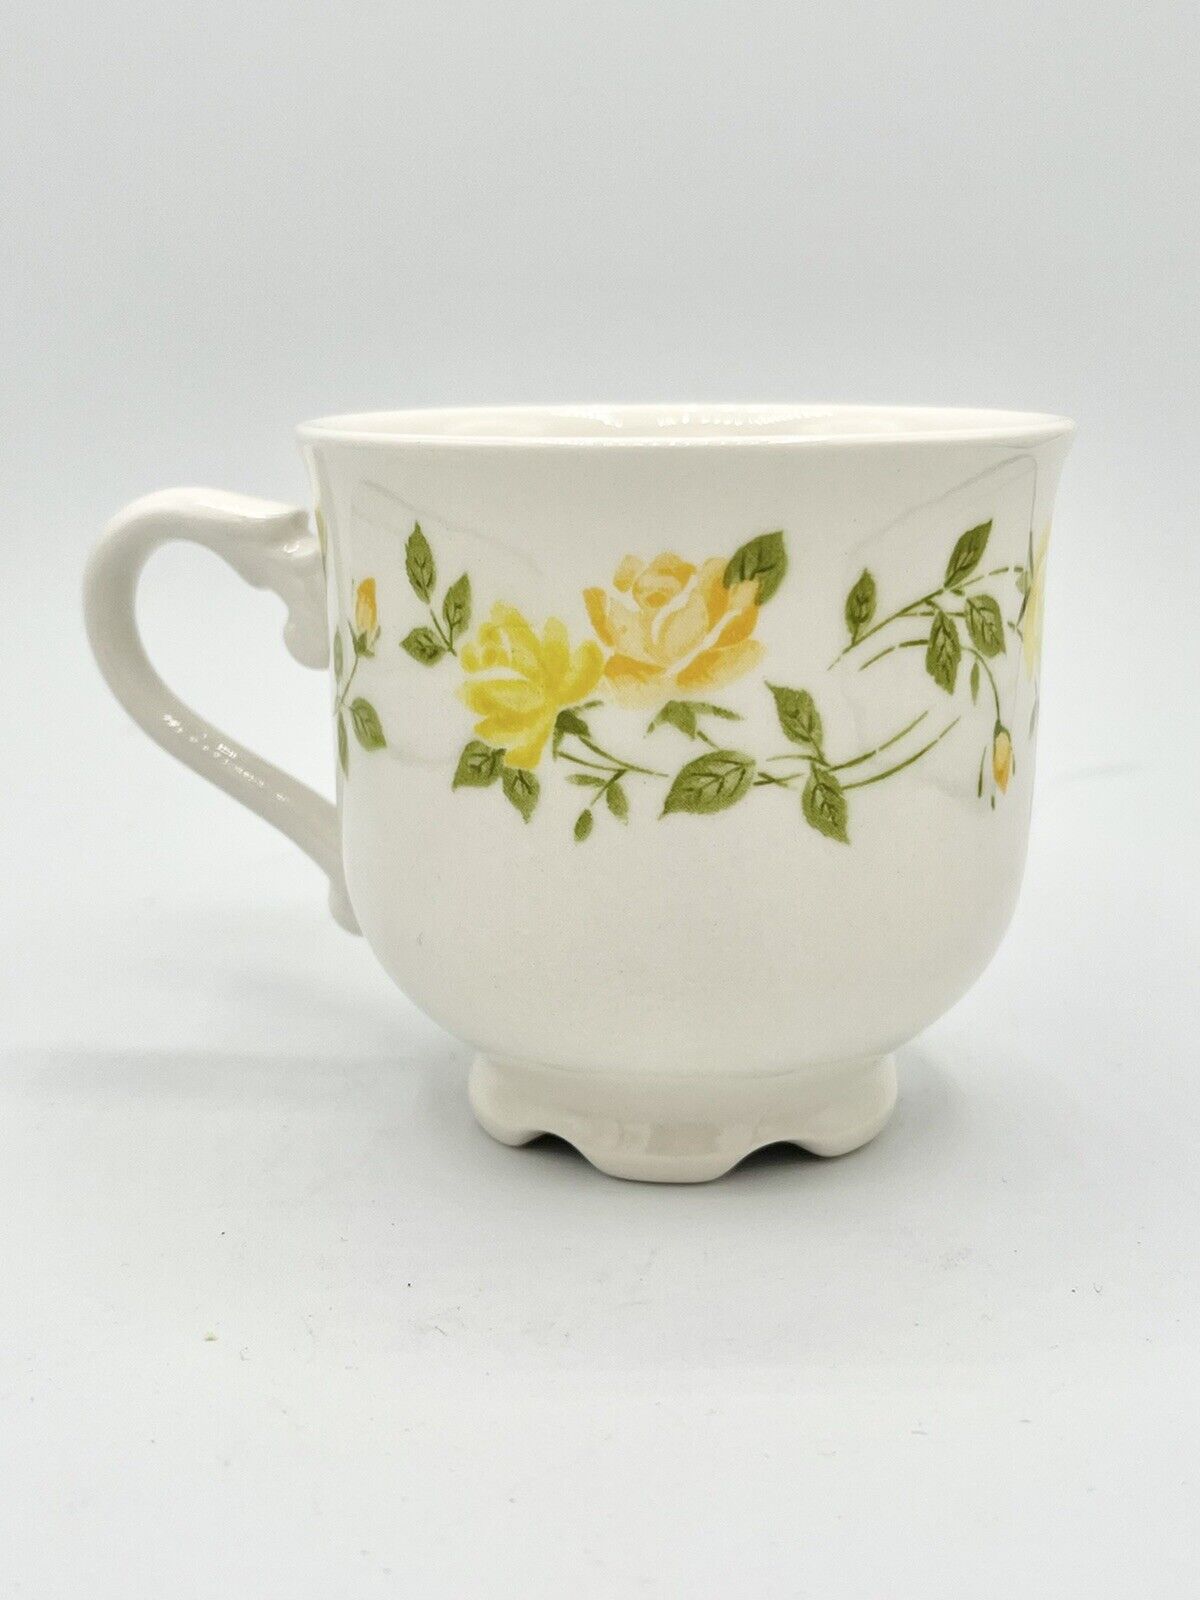 Nikko Ironstone #34 Pattern Floral Mug Tea Cup Footed Retired Replacement